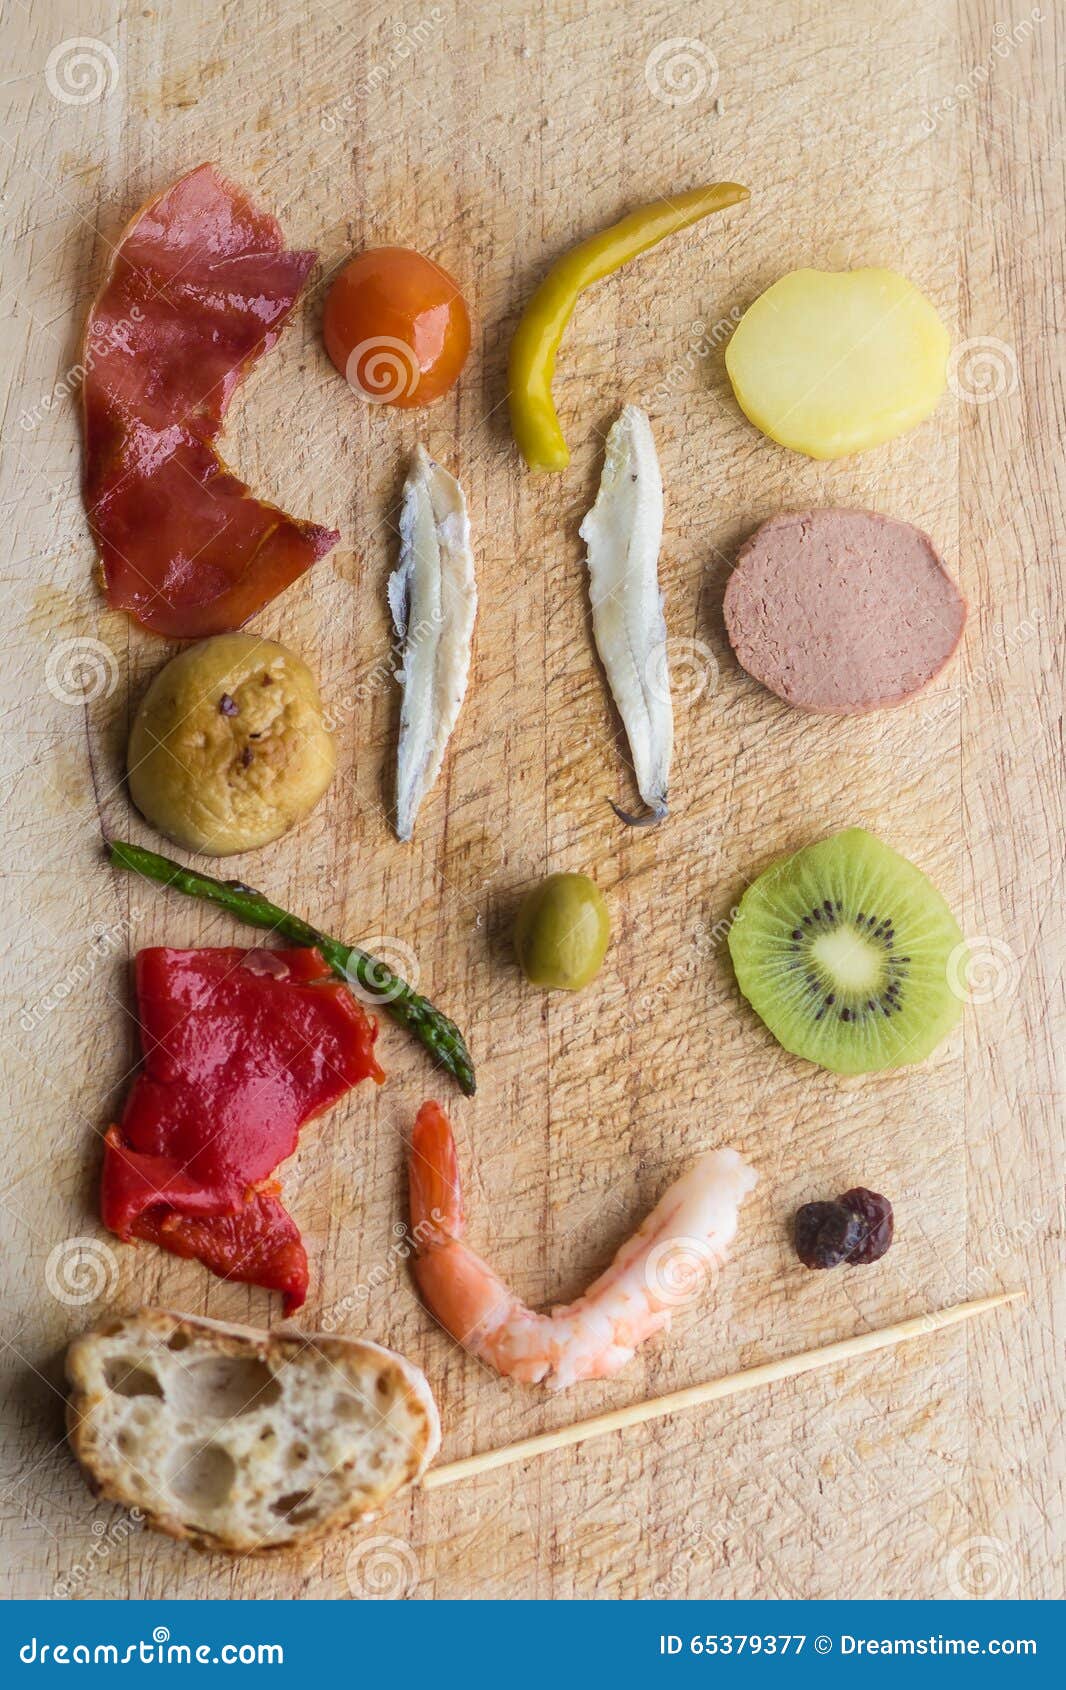 pintxos pintxo ingredients on a rustic board, food from the basque country